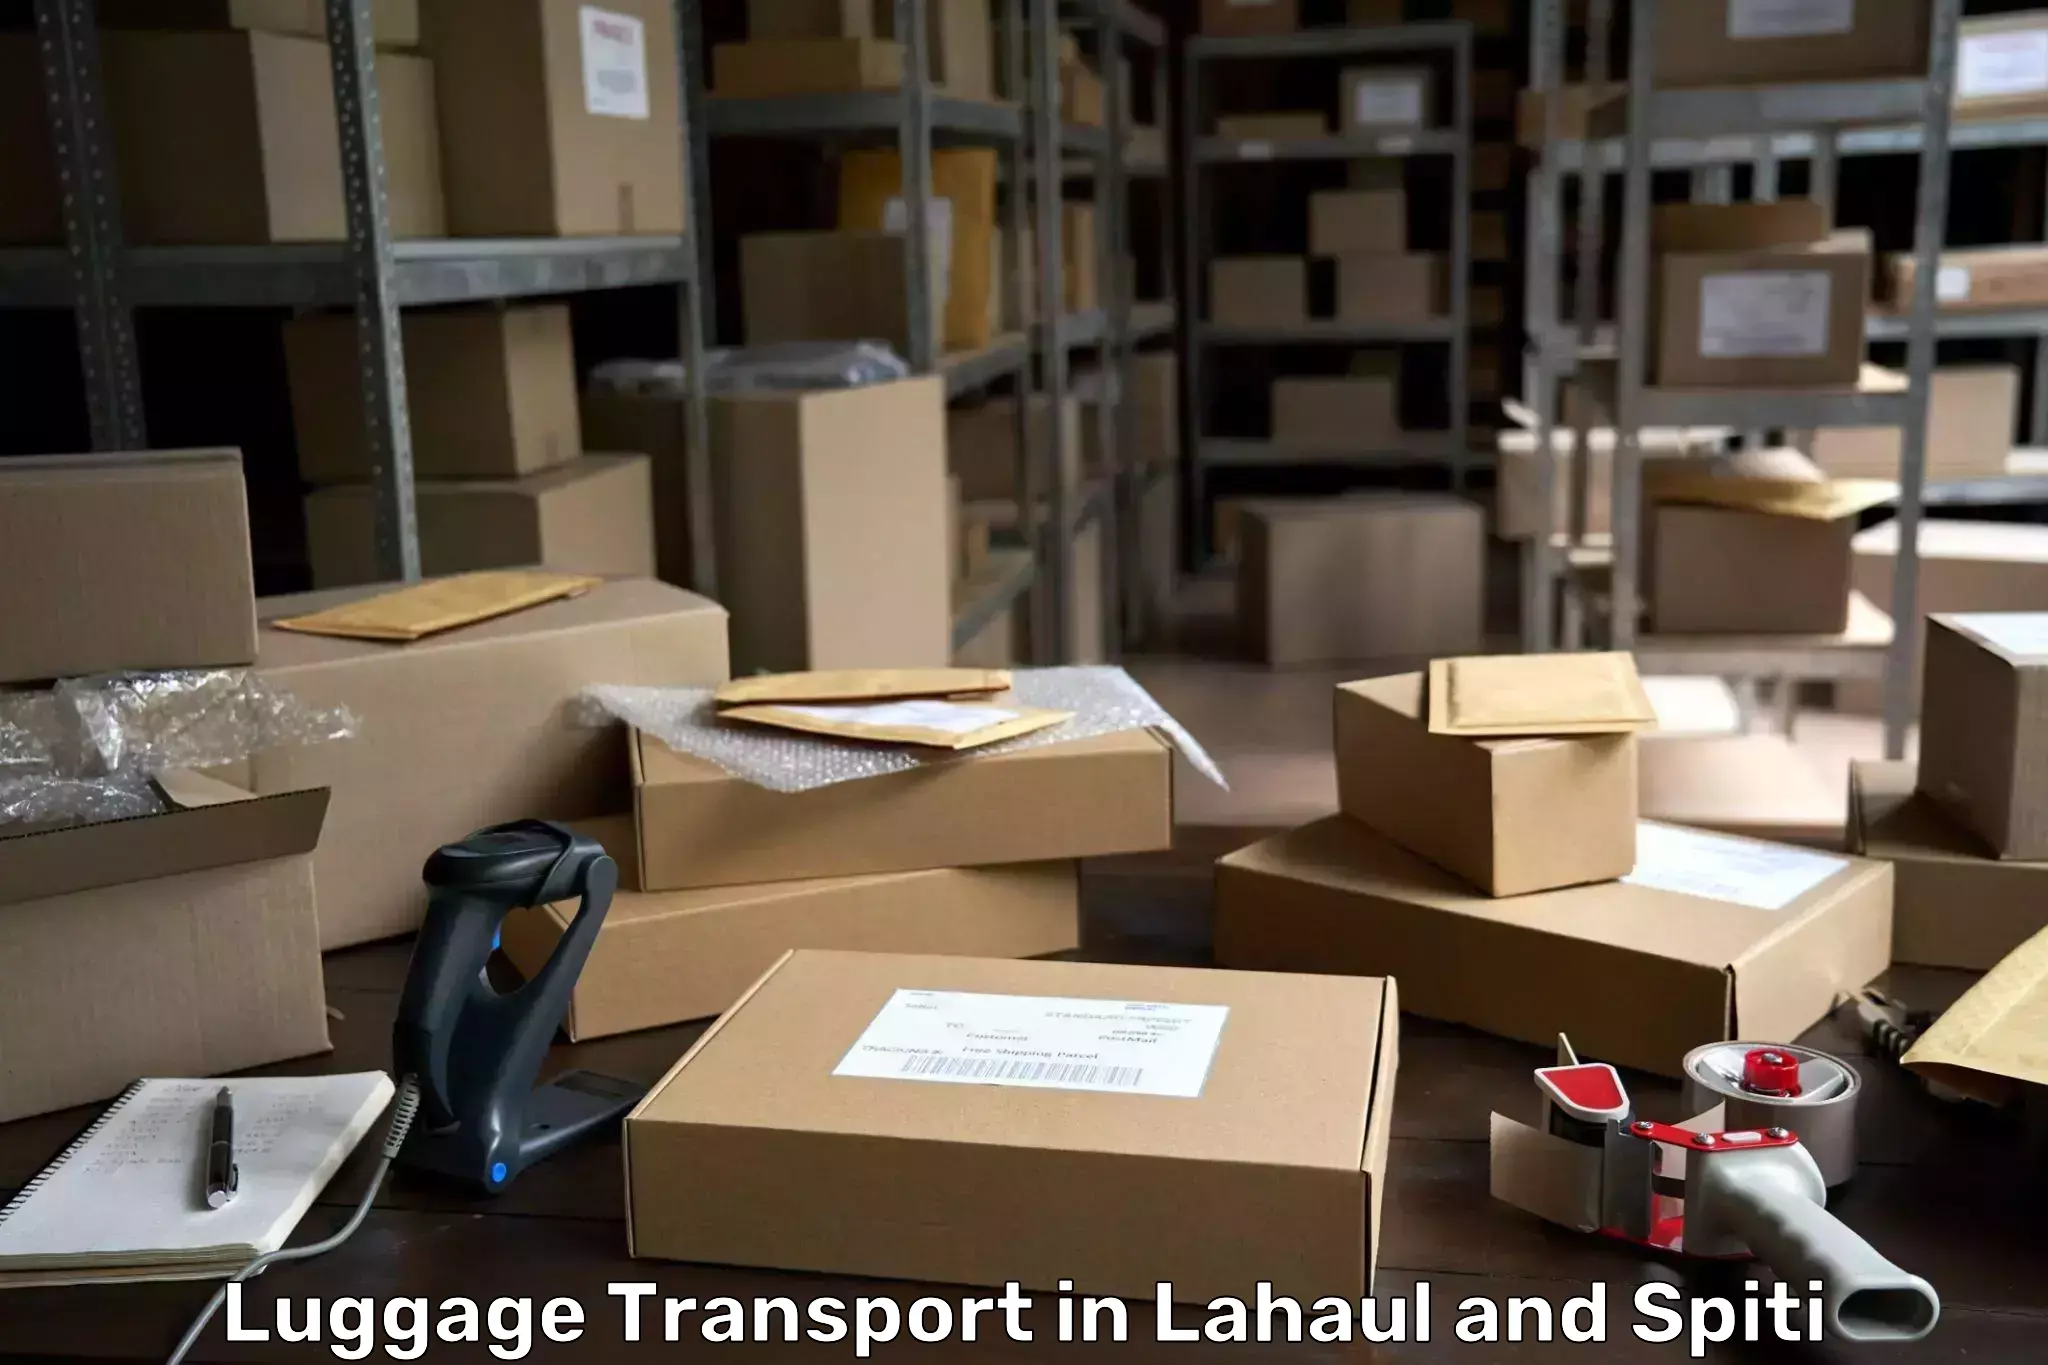 Baggage transport network in Lahaul and Spiti